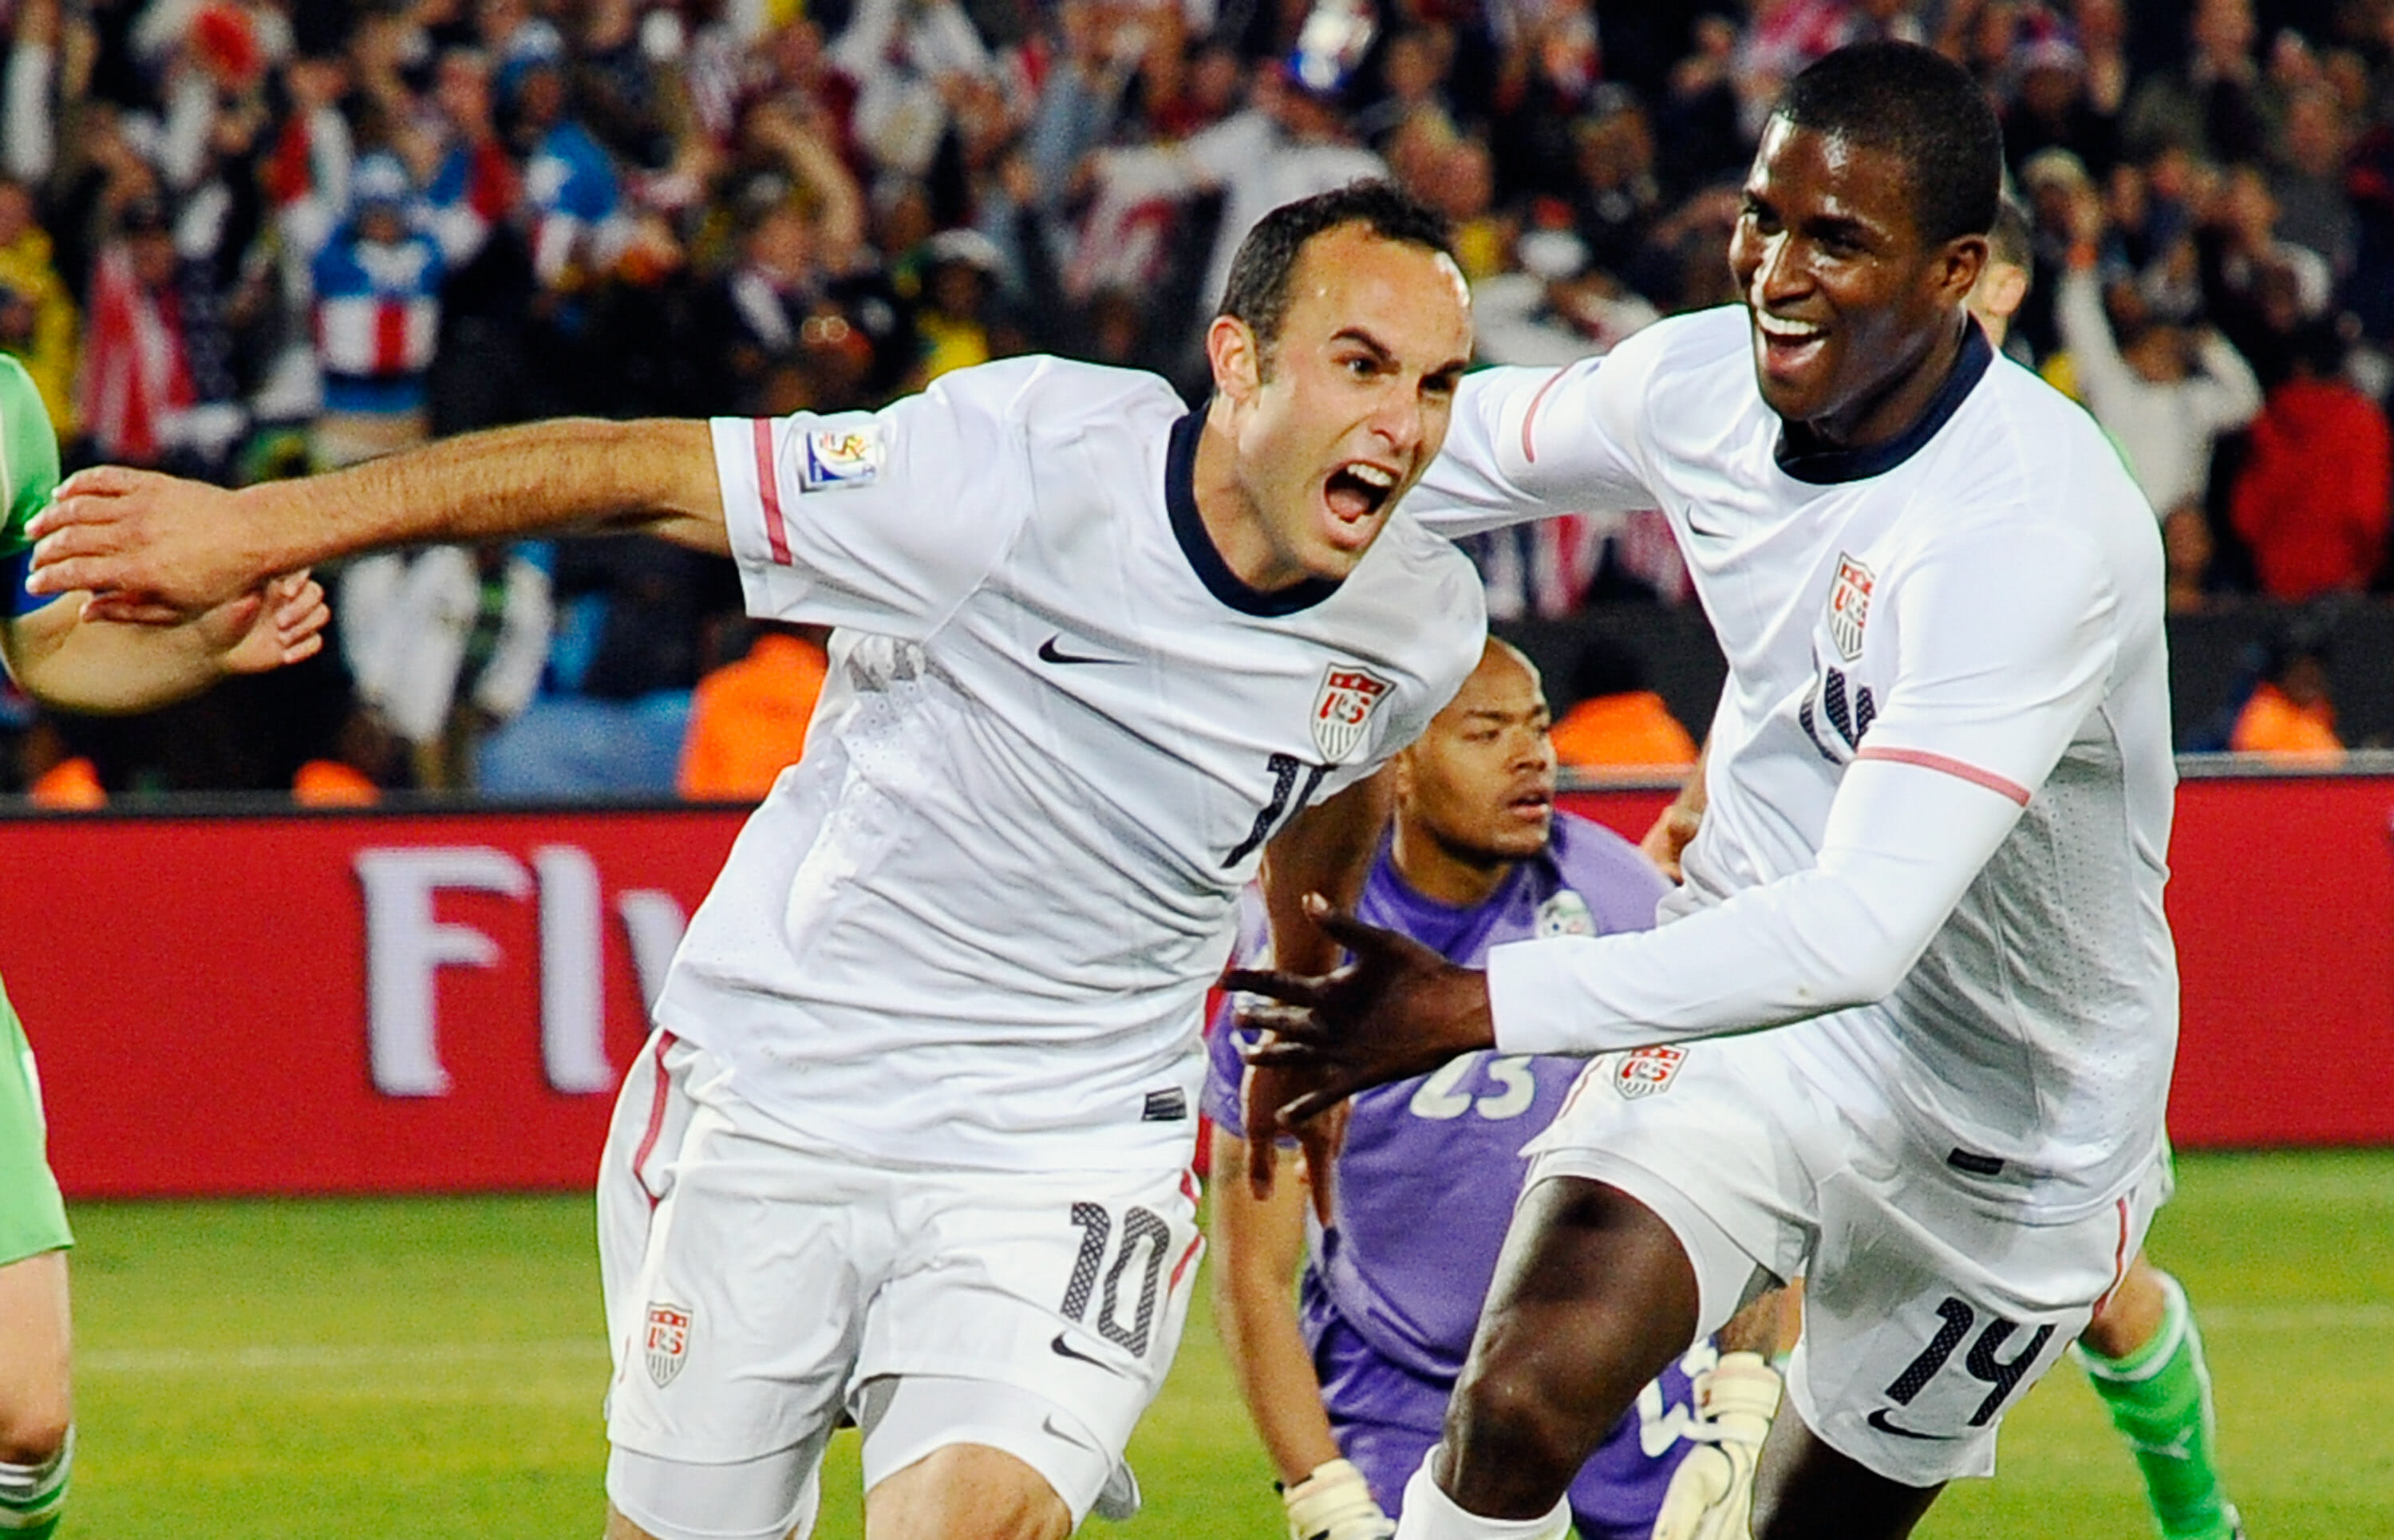 PRETORIA, SOUTH AFRICA - JUNE 23:  Landon Donovan of the United States celebrates with teammate Edson Buddle after scoring the winning goal that sends the USA through to the second round during the 2010 FIFA World Cup South Africa Group C match between USA and Algeria at the Loftus Versfeld Stadium on June 23, 2010 in Tshwane/Pretoria, South Africa. (Photo by Kevork Djansezian/Getty Images)